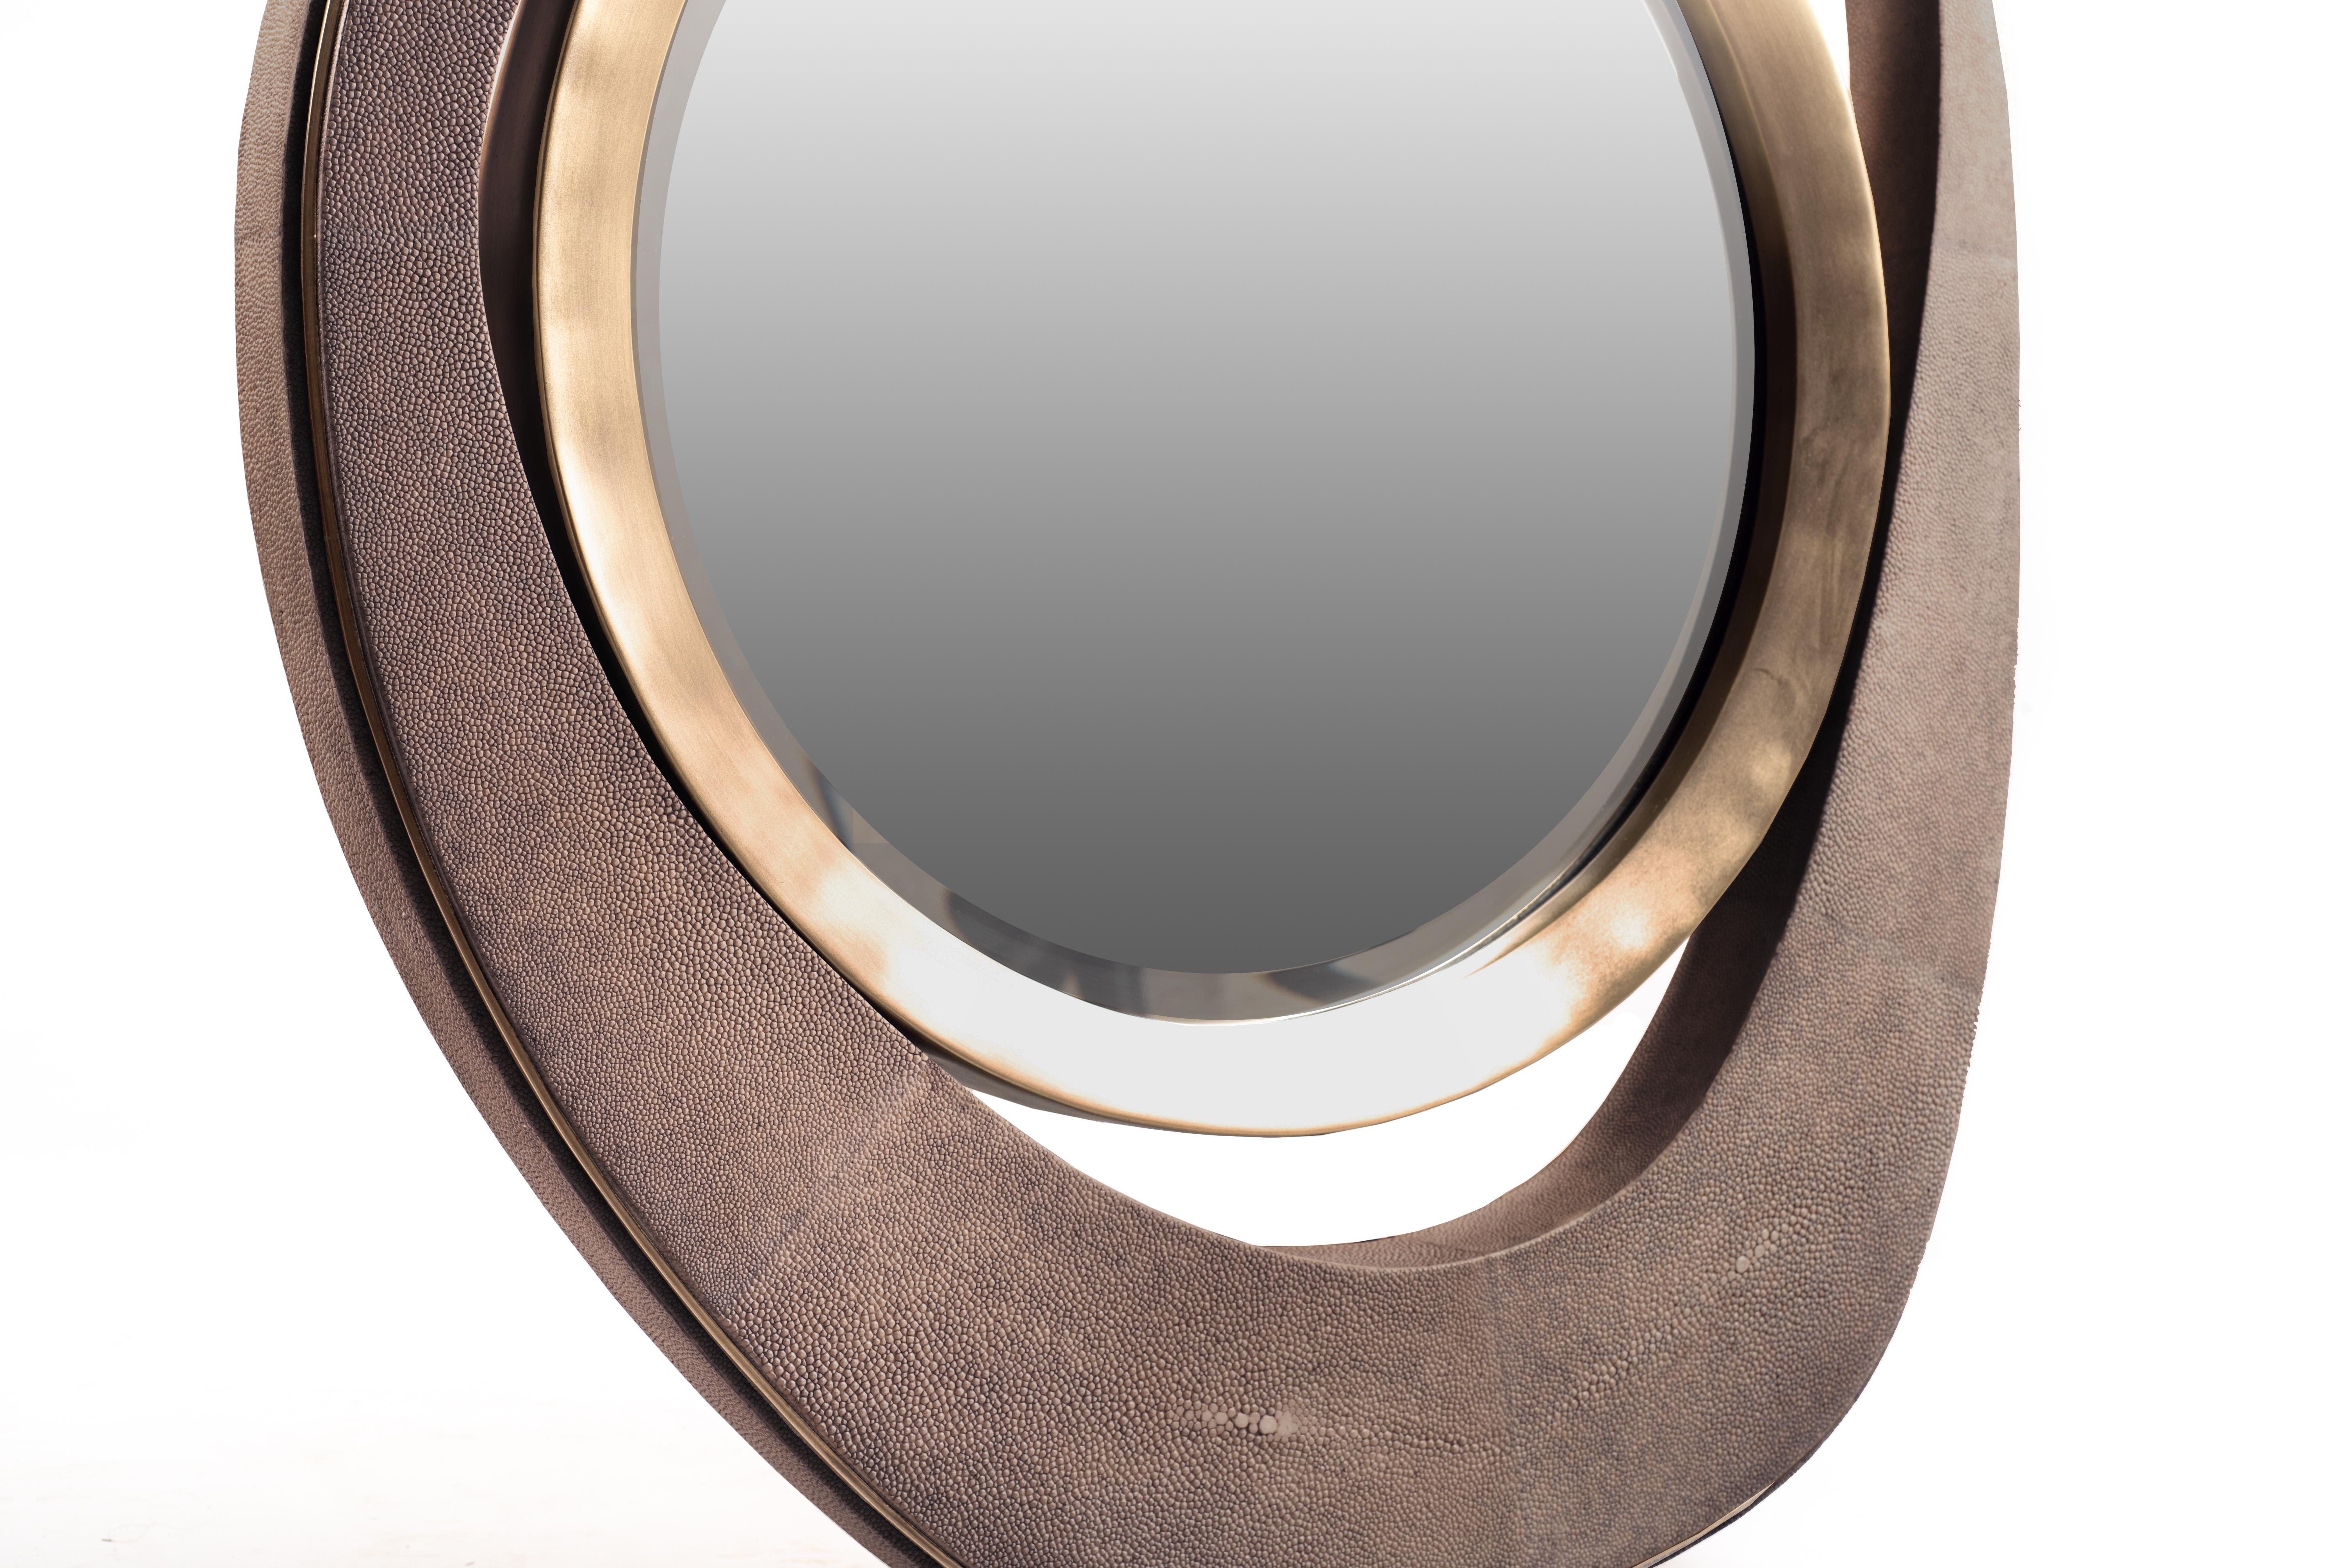 The peacock mirror in mink Shagreen and bronze-patina brass details is inspired by R&Y Augousti’s iconic nesting coffee tables is the perfect accent piece to dress up any wall. Available in a large size and other finishes see images at end of